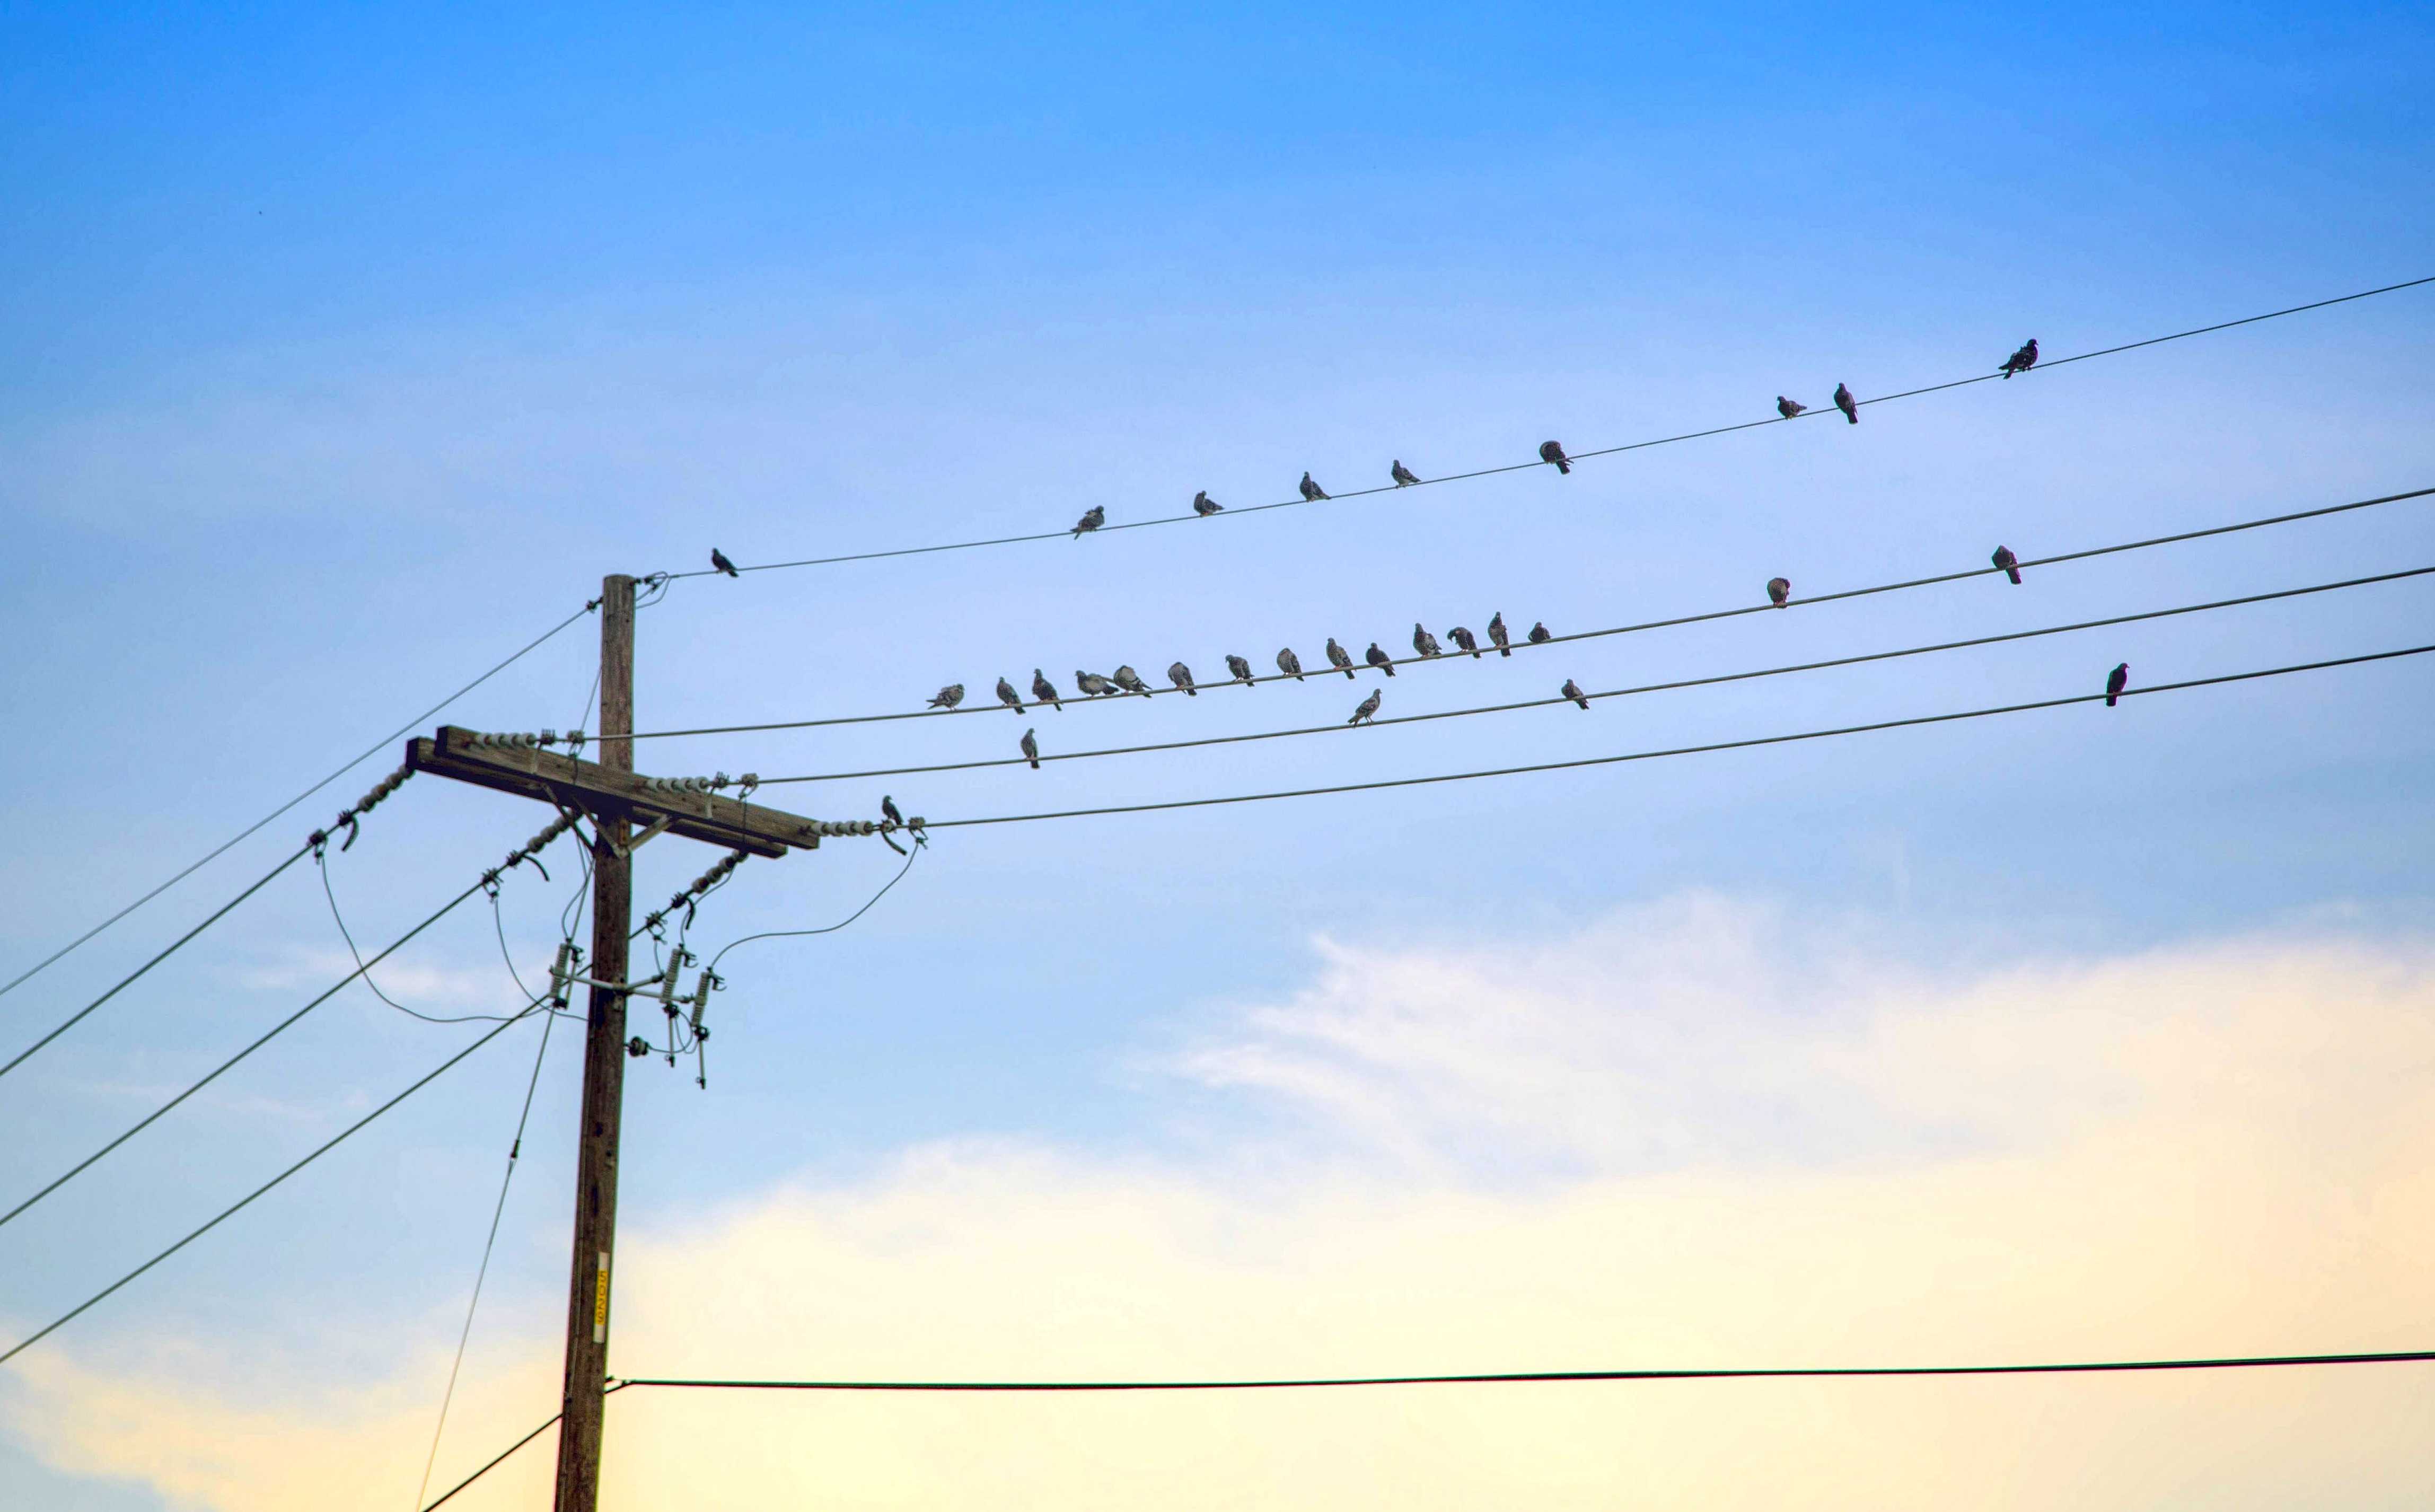 flock of birds on electric wire under cloudy sky during daytime